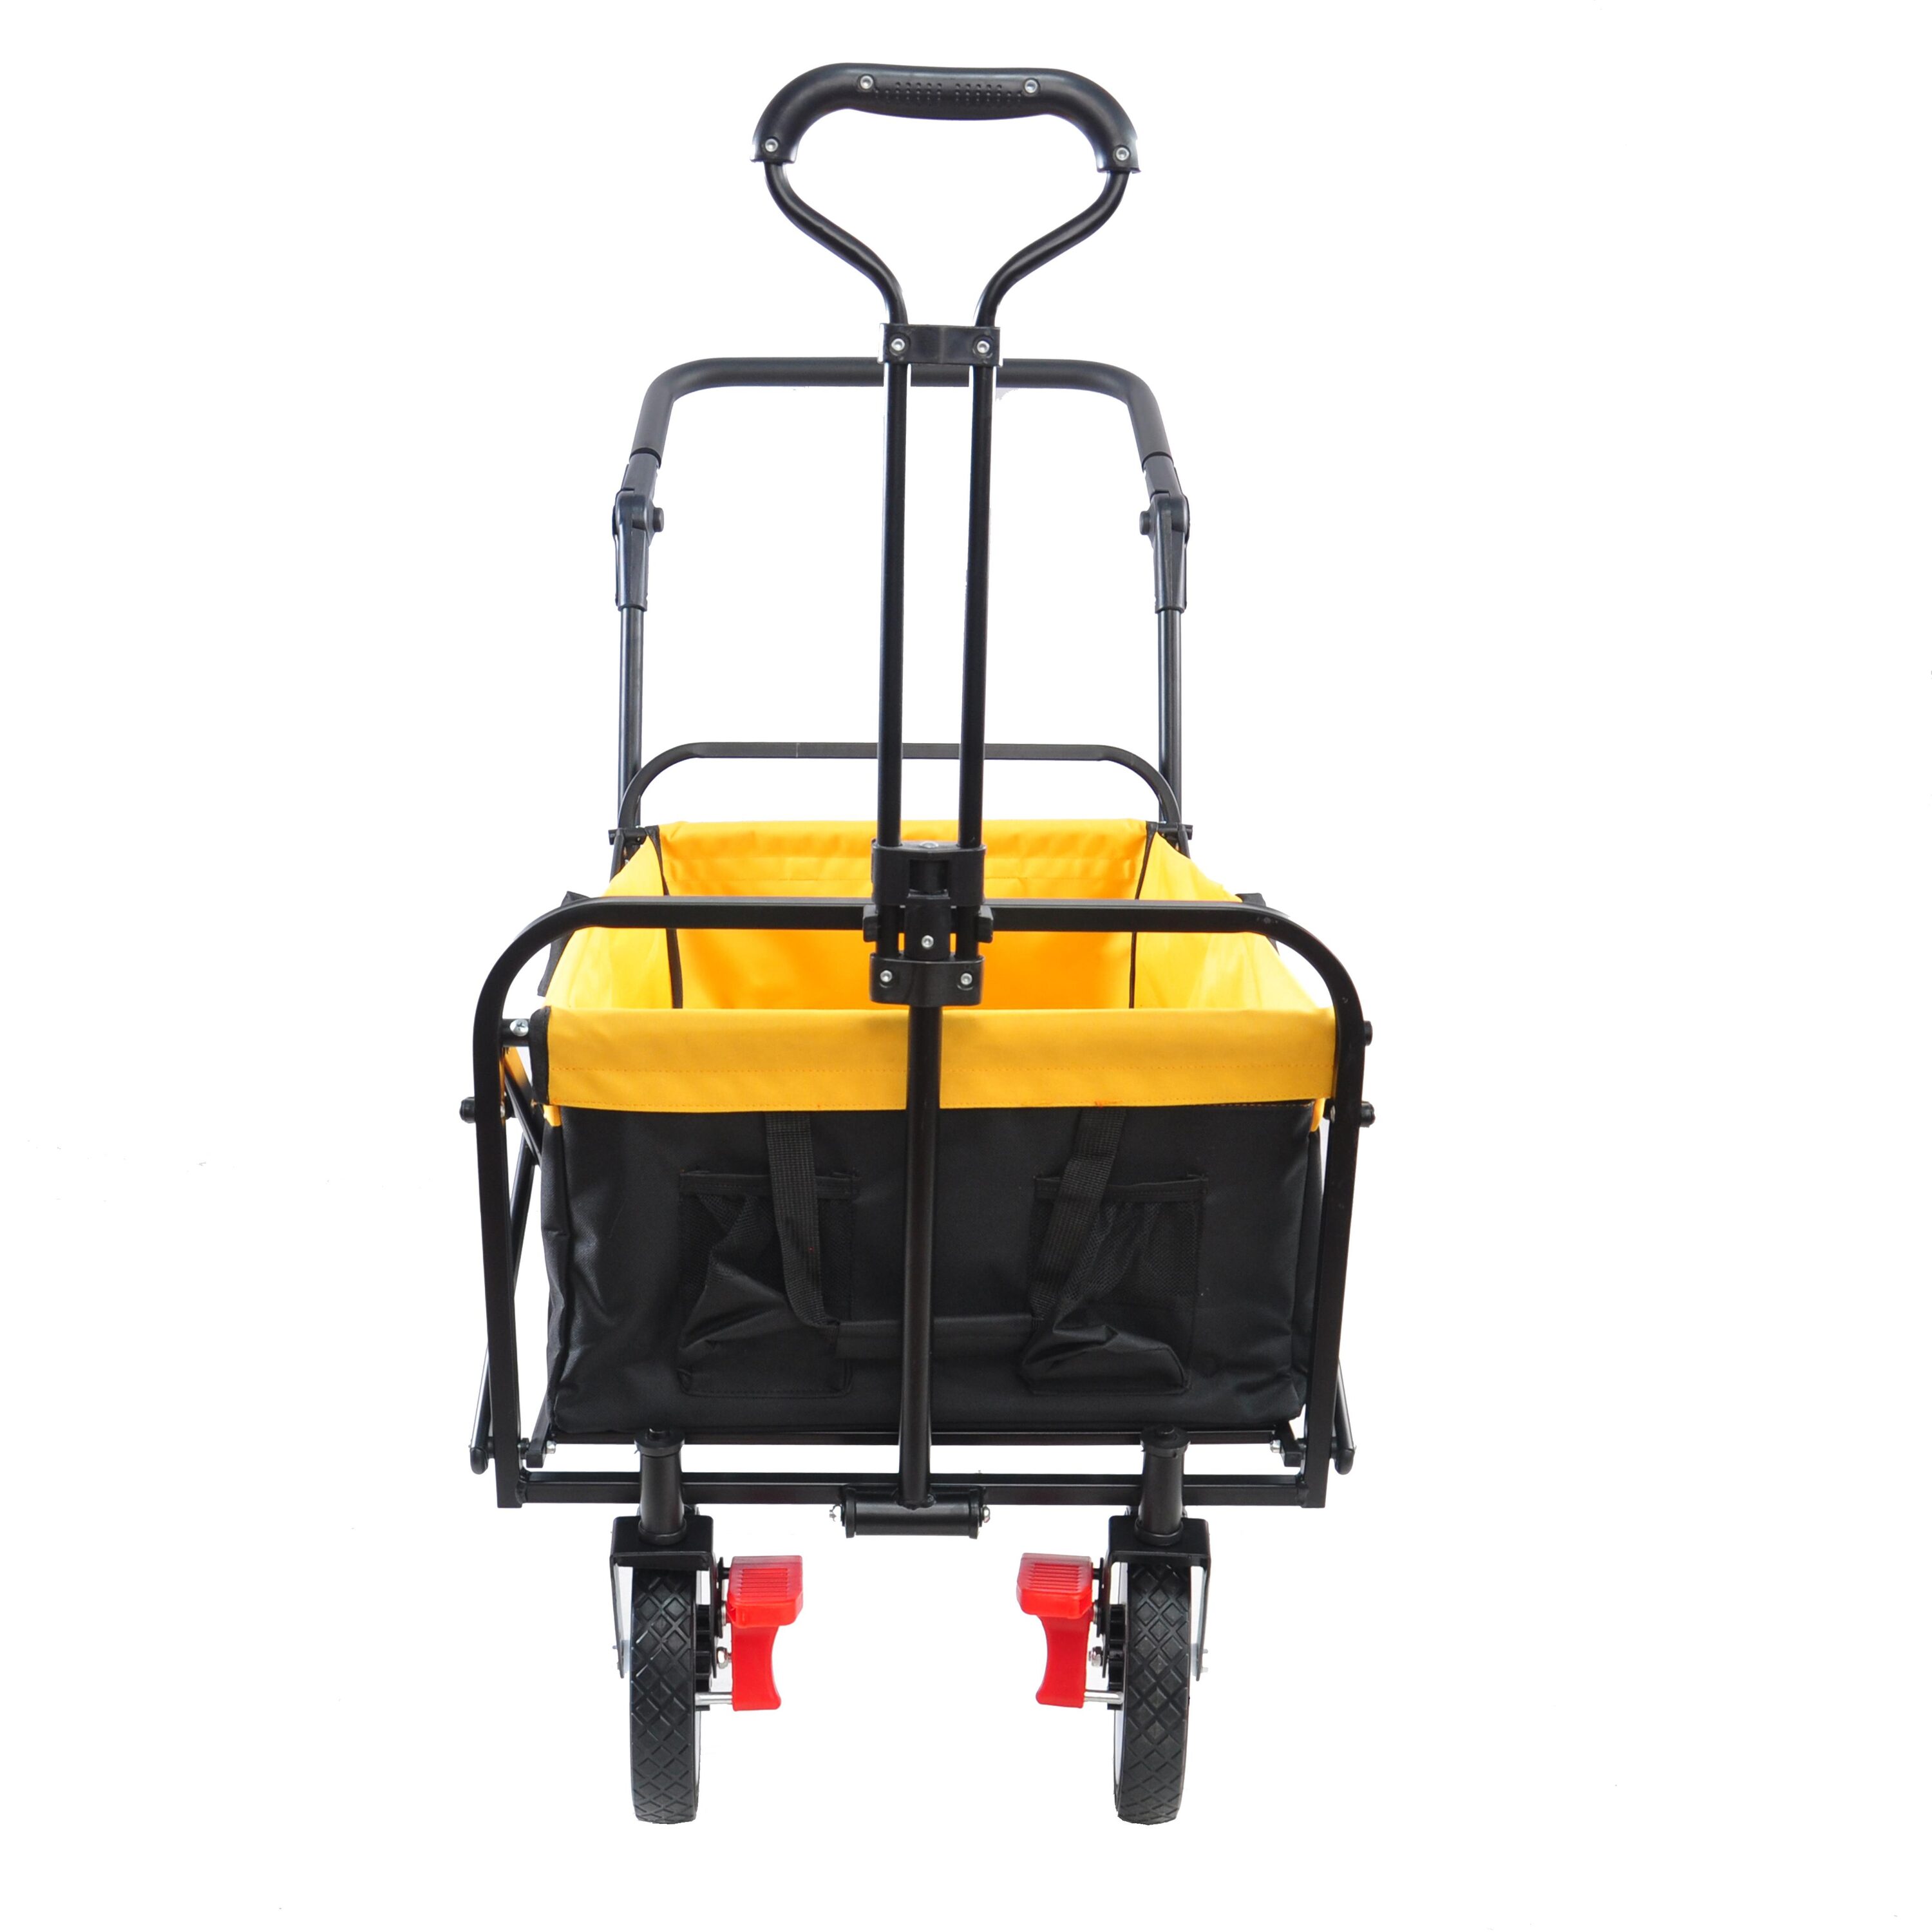 Folding Portable Trolley Cart with Canopy, Shopping Cart Heavy